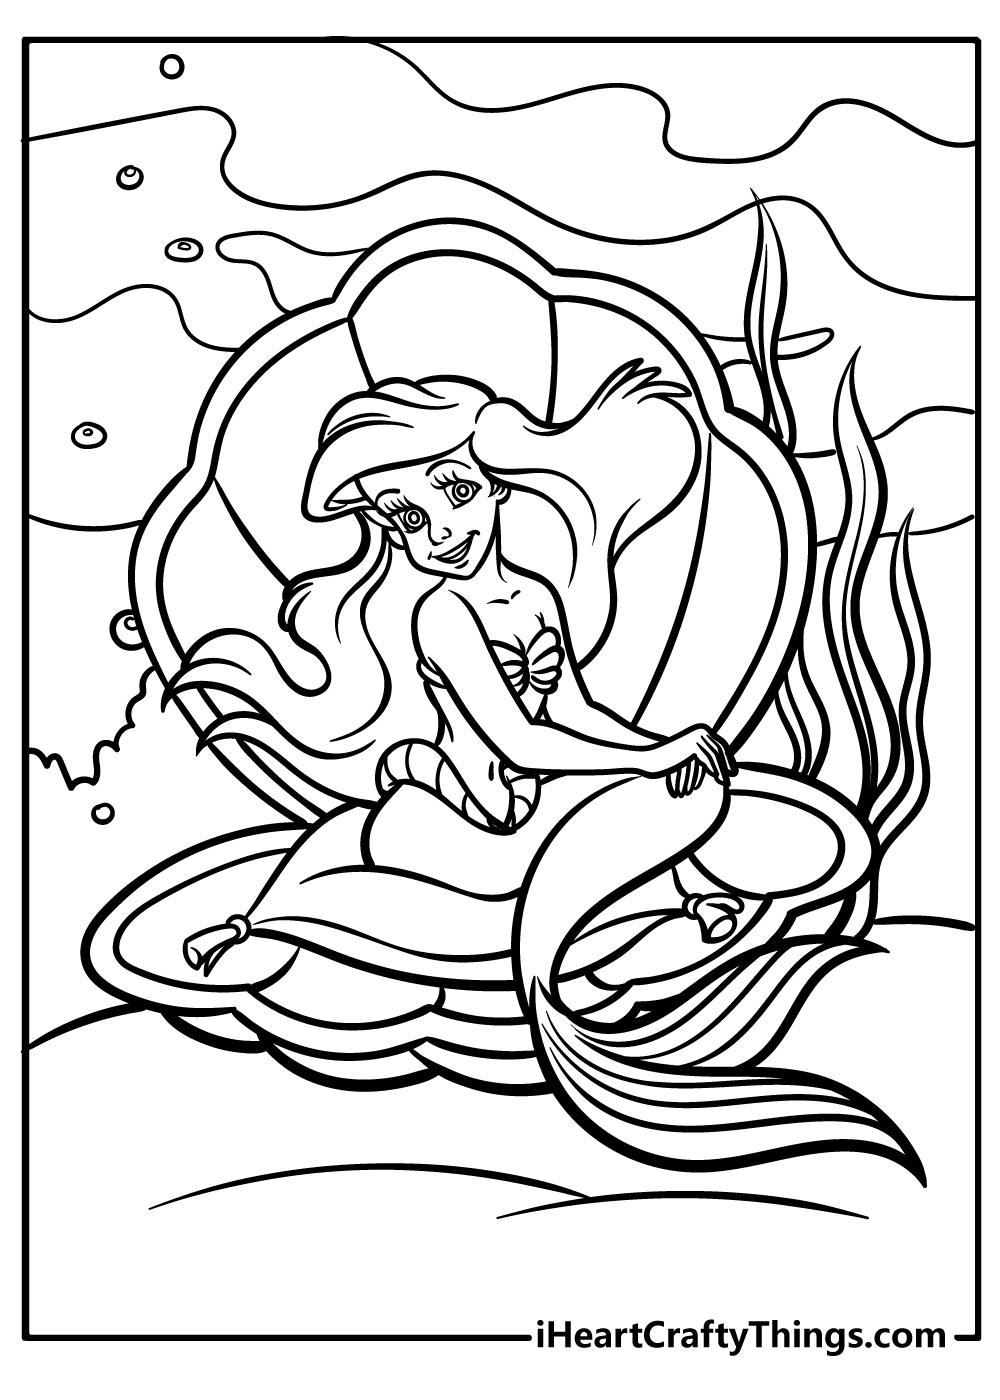 Printable Ariel Coloring Pages Updated 18